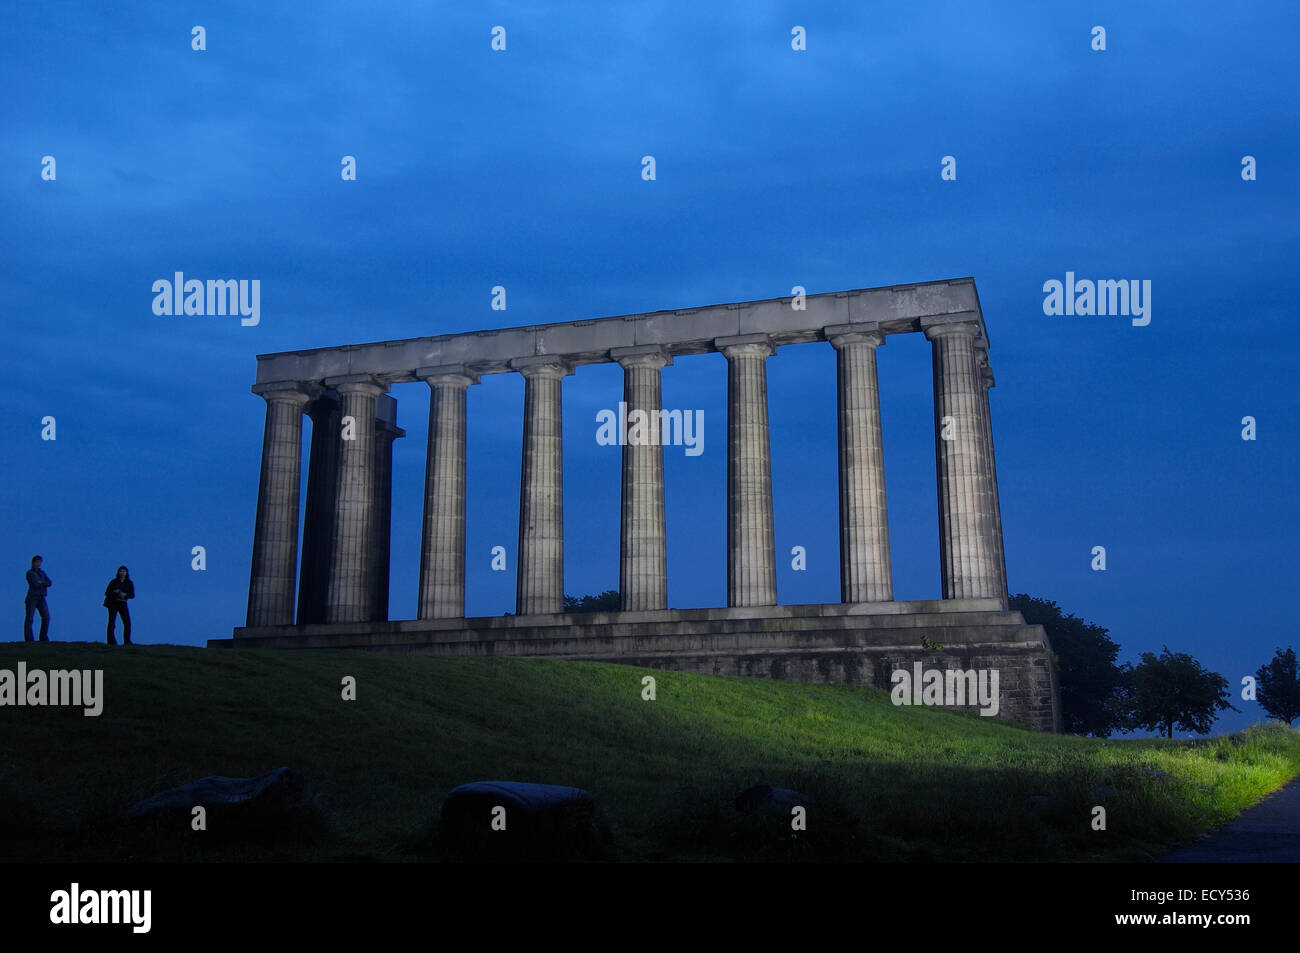 National Monument at dusk, replica of the Parthenon, designed in 1822 as a memorial to the Scots who died in the Napoleonic Wars Stock Photo